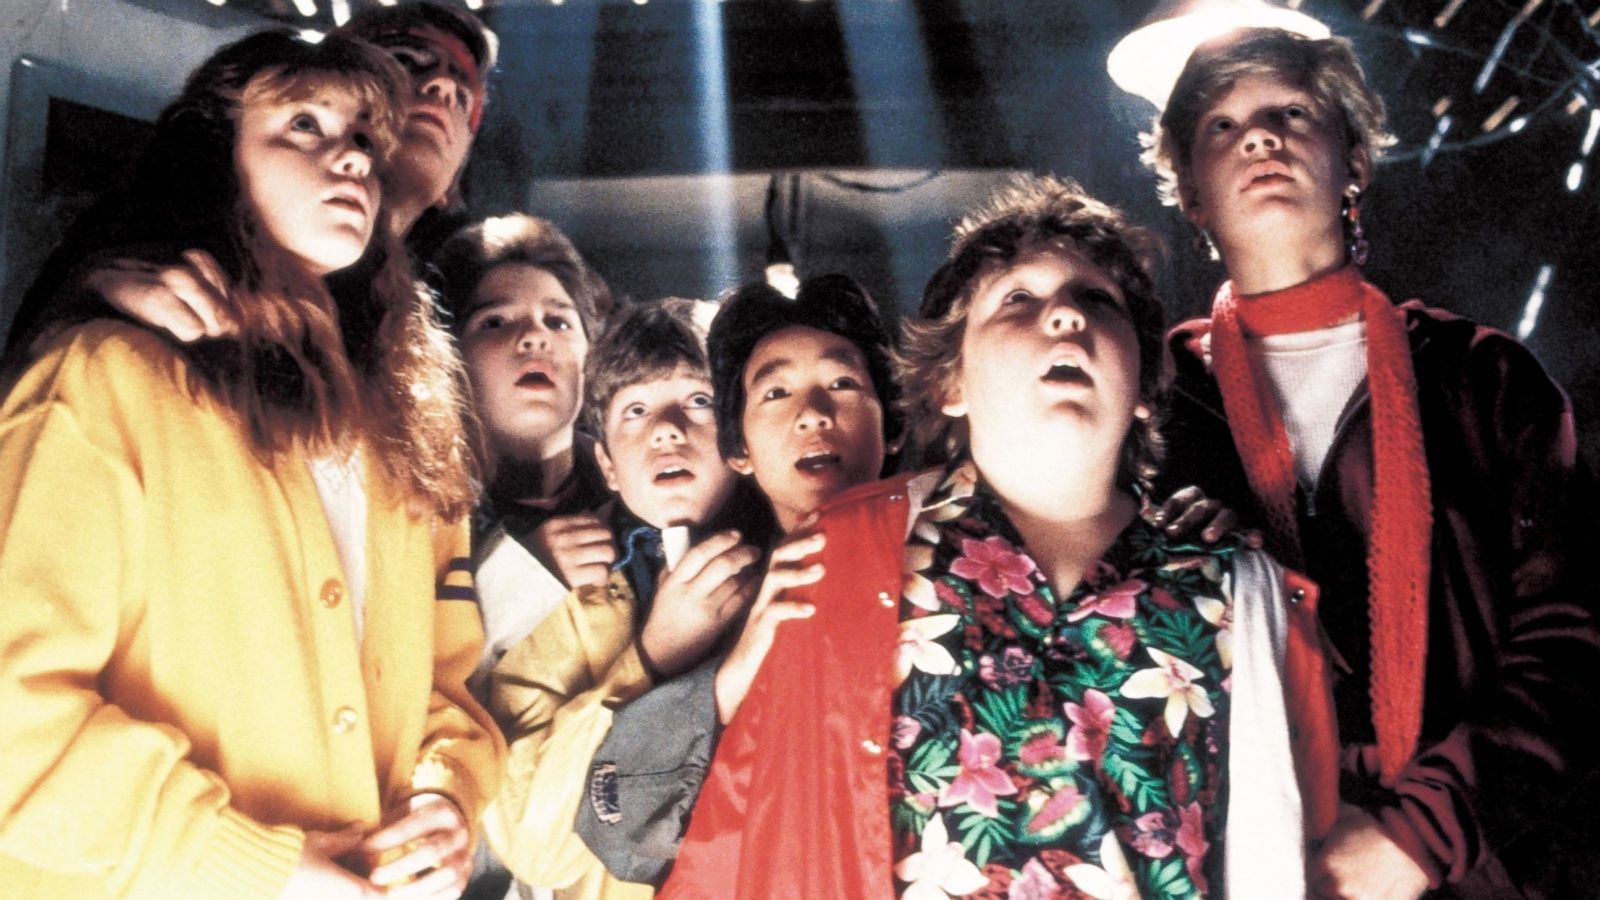 The Goonies' Turns 30: Where Are They Now?